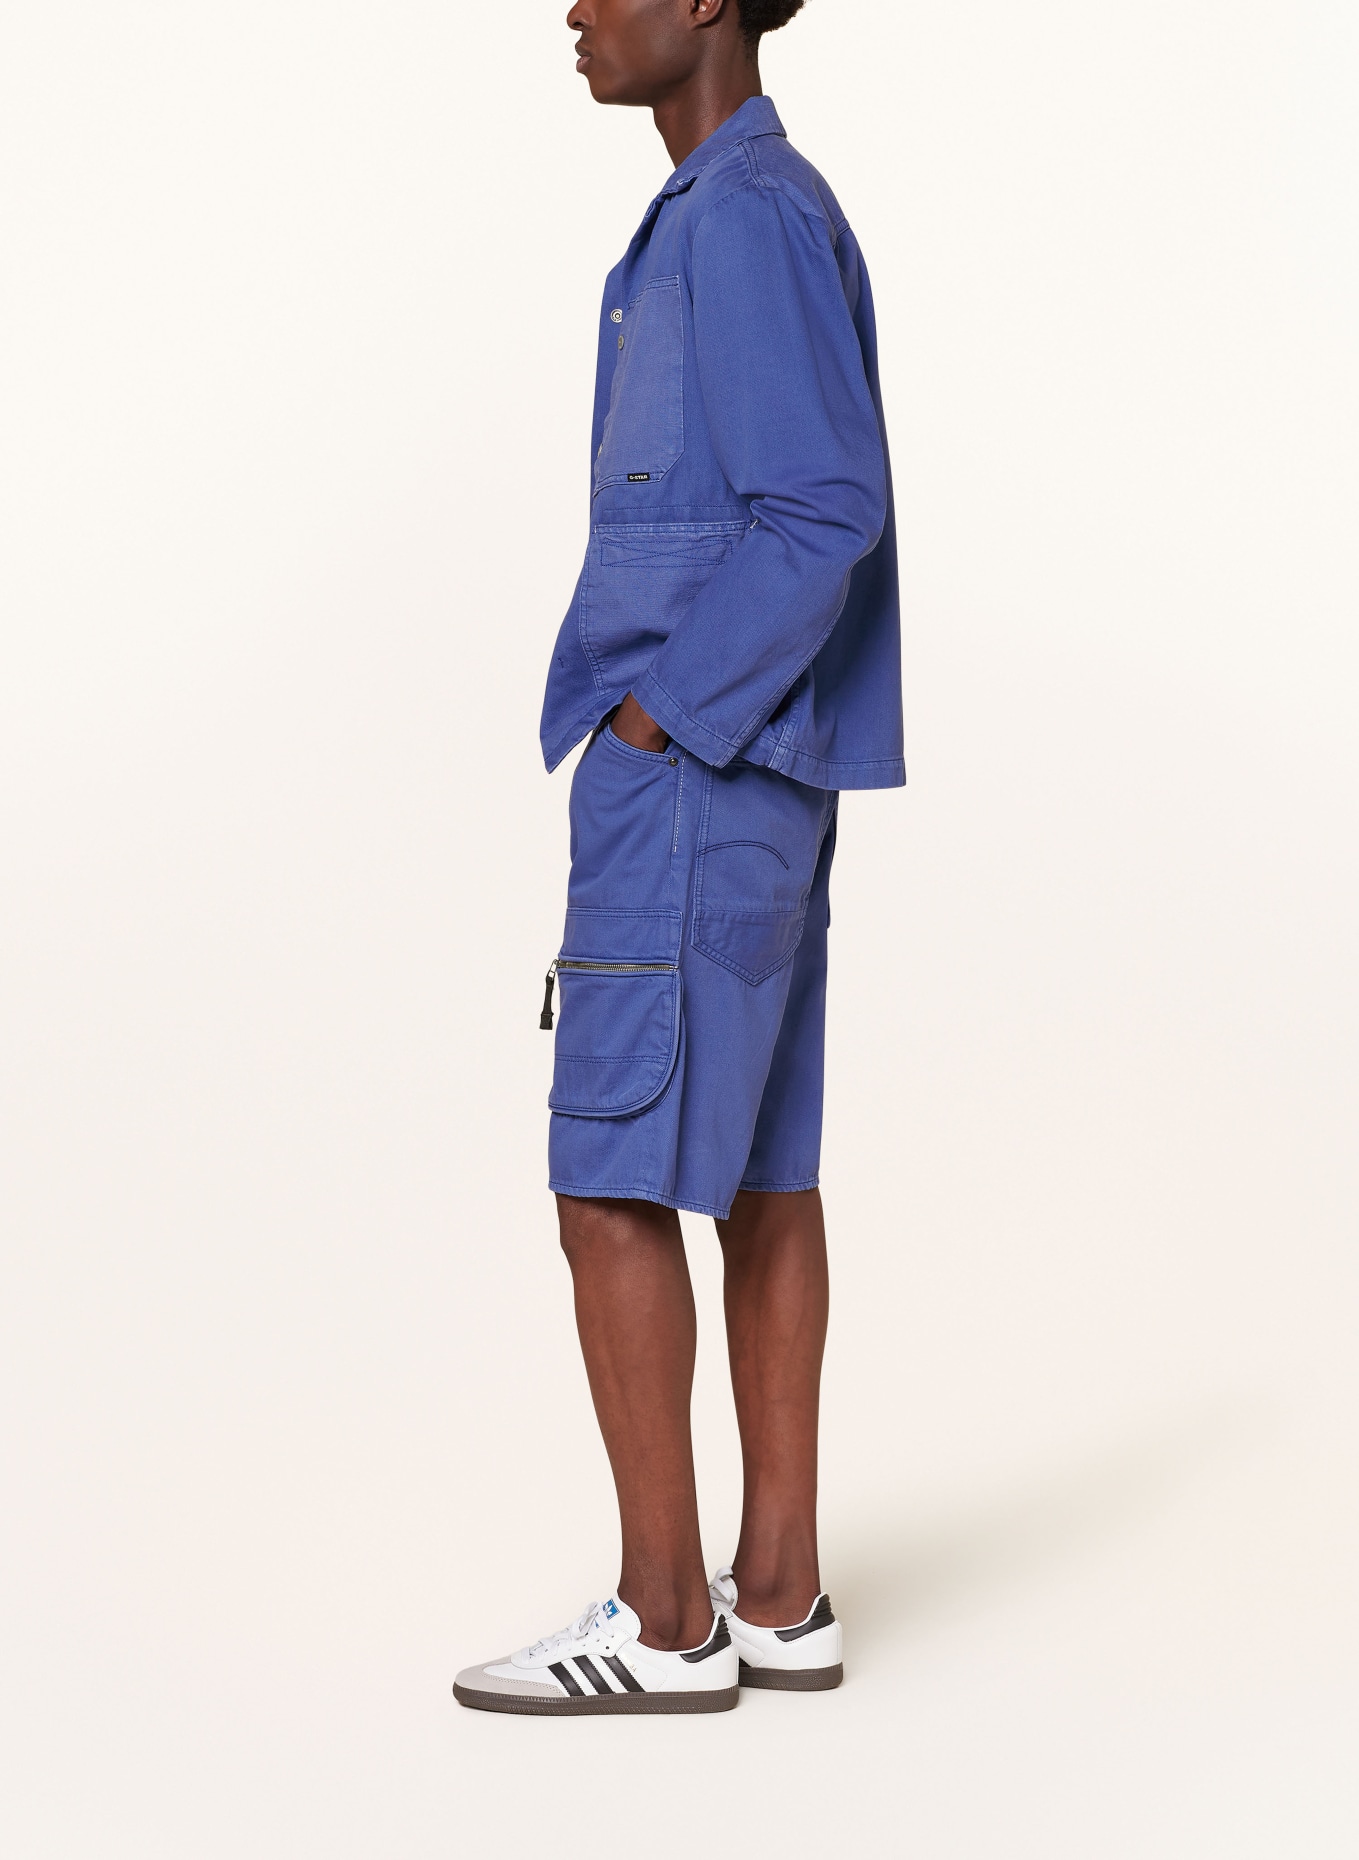 G-Star RAW Cargo shorts regular fit, Color: G336 faded blue papillon gd (Image 4)